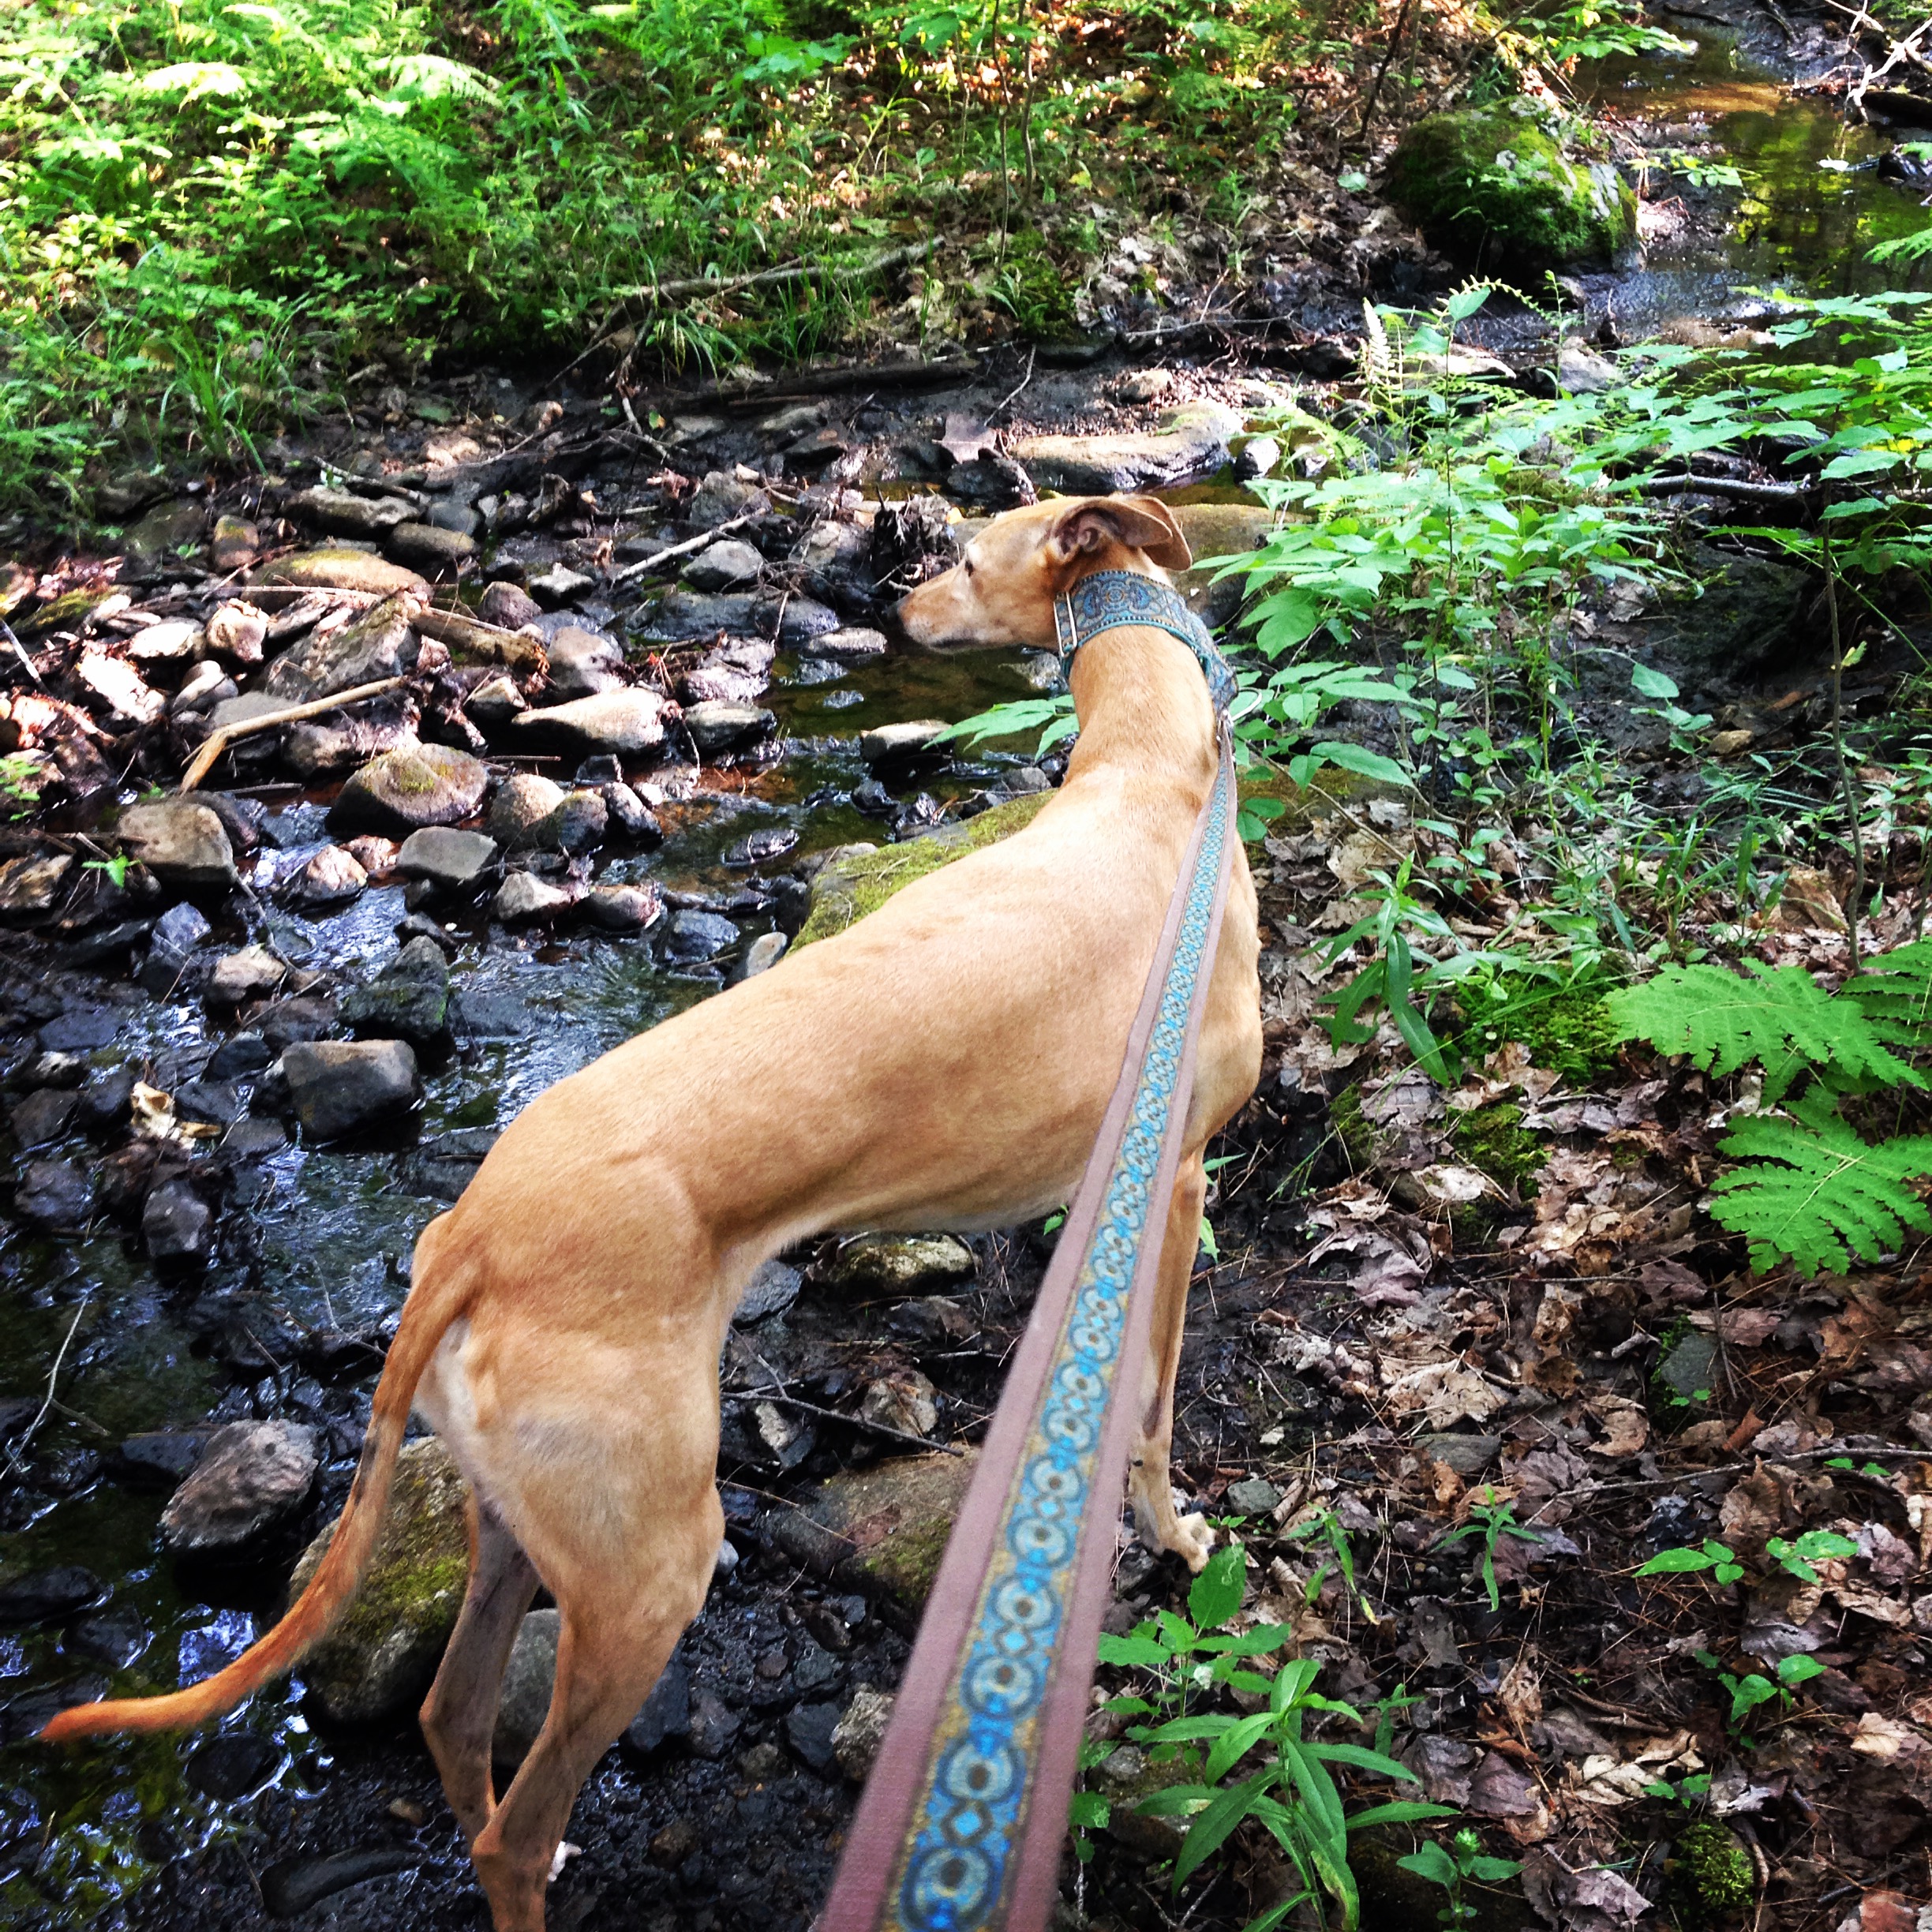 Frugal Hound fording our stream